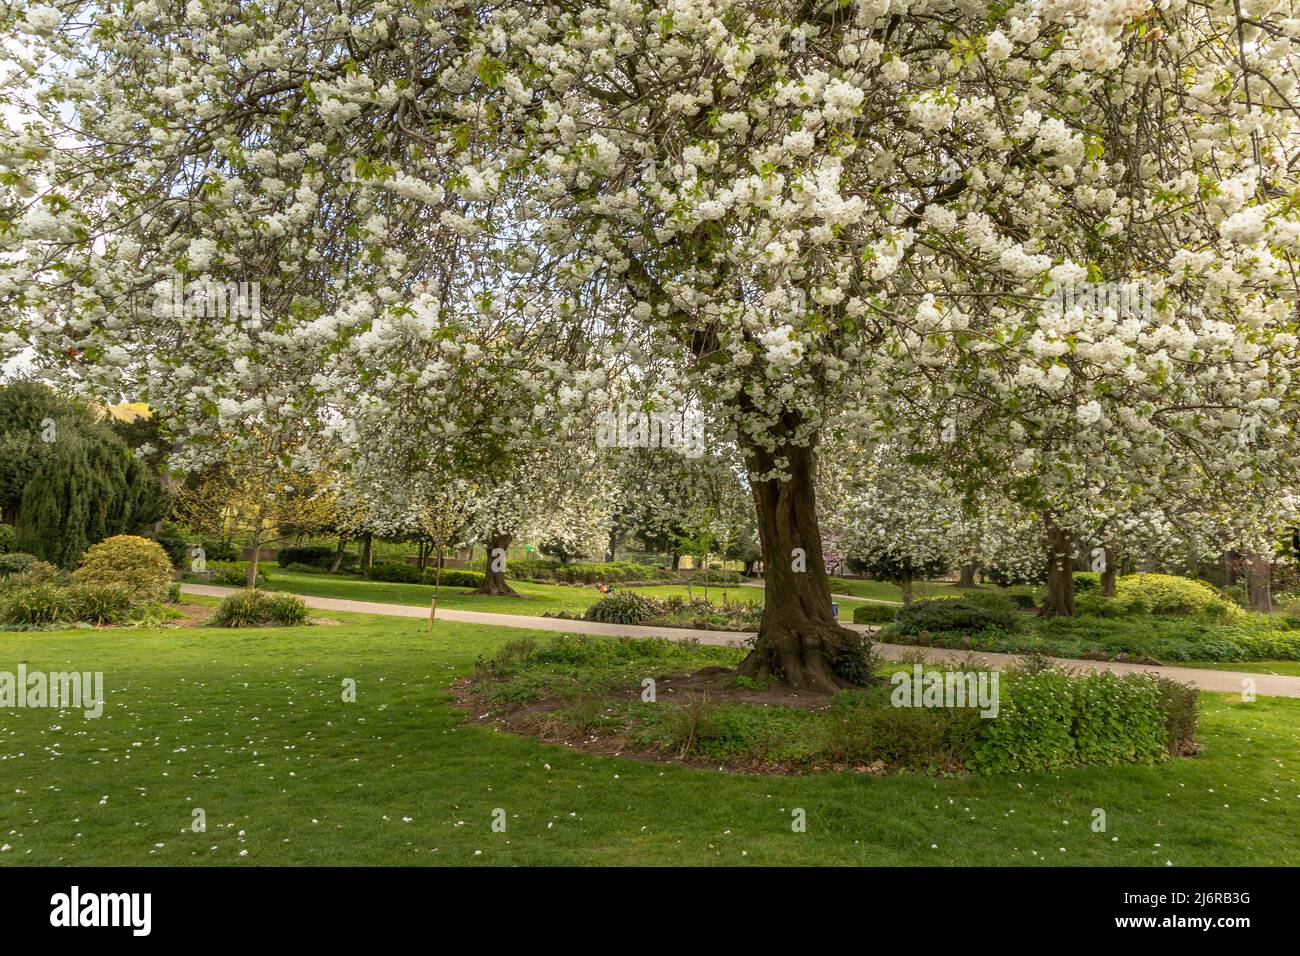 Spring blossom in Roberts Park, Baildon, Yorkshire, England. The park is a Grade ll listed park on the English Heritage Register of Parks and Gardens. Stock Photo